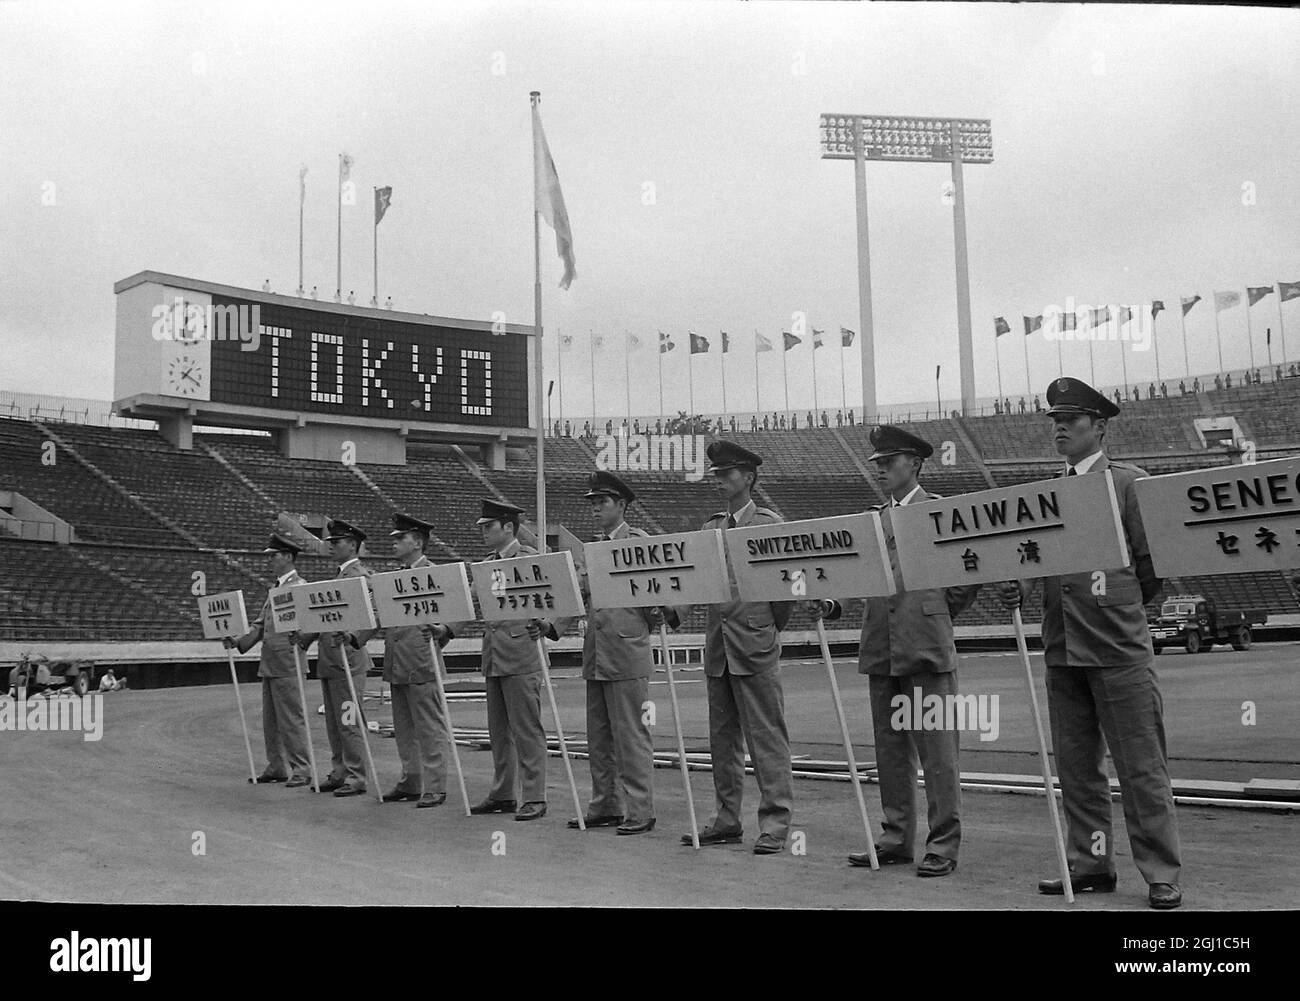 OLYMPICS OPENING REHERSAL STANDARD BEARERS SHOW NAMES NATIONS  AT OLYMPICS IN TOKYO, JAPAN, SUMMER OLYMPIC GAMES ;  29 SEPTEMBER 1964 Stock Photo